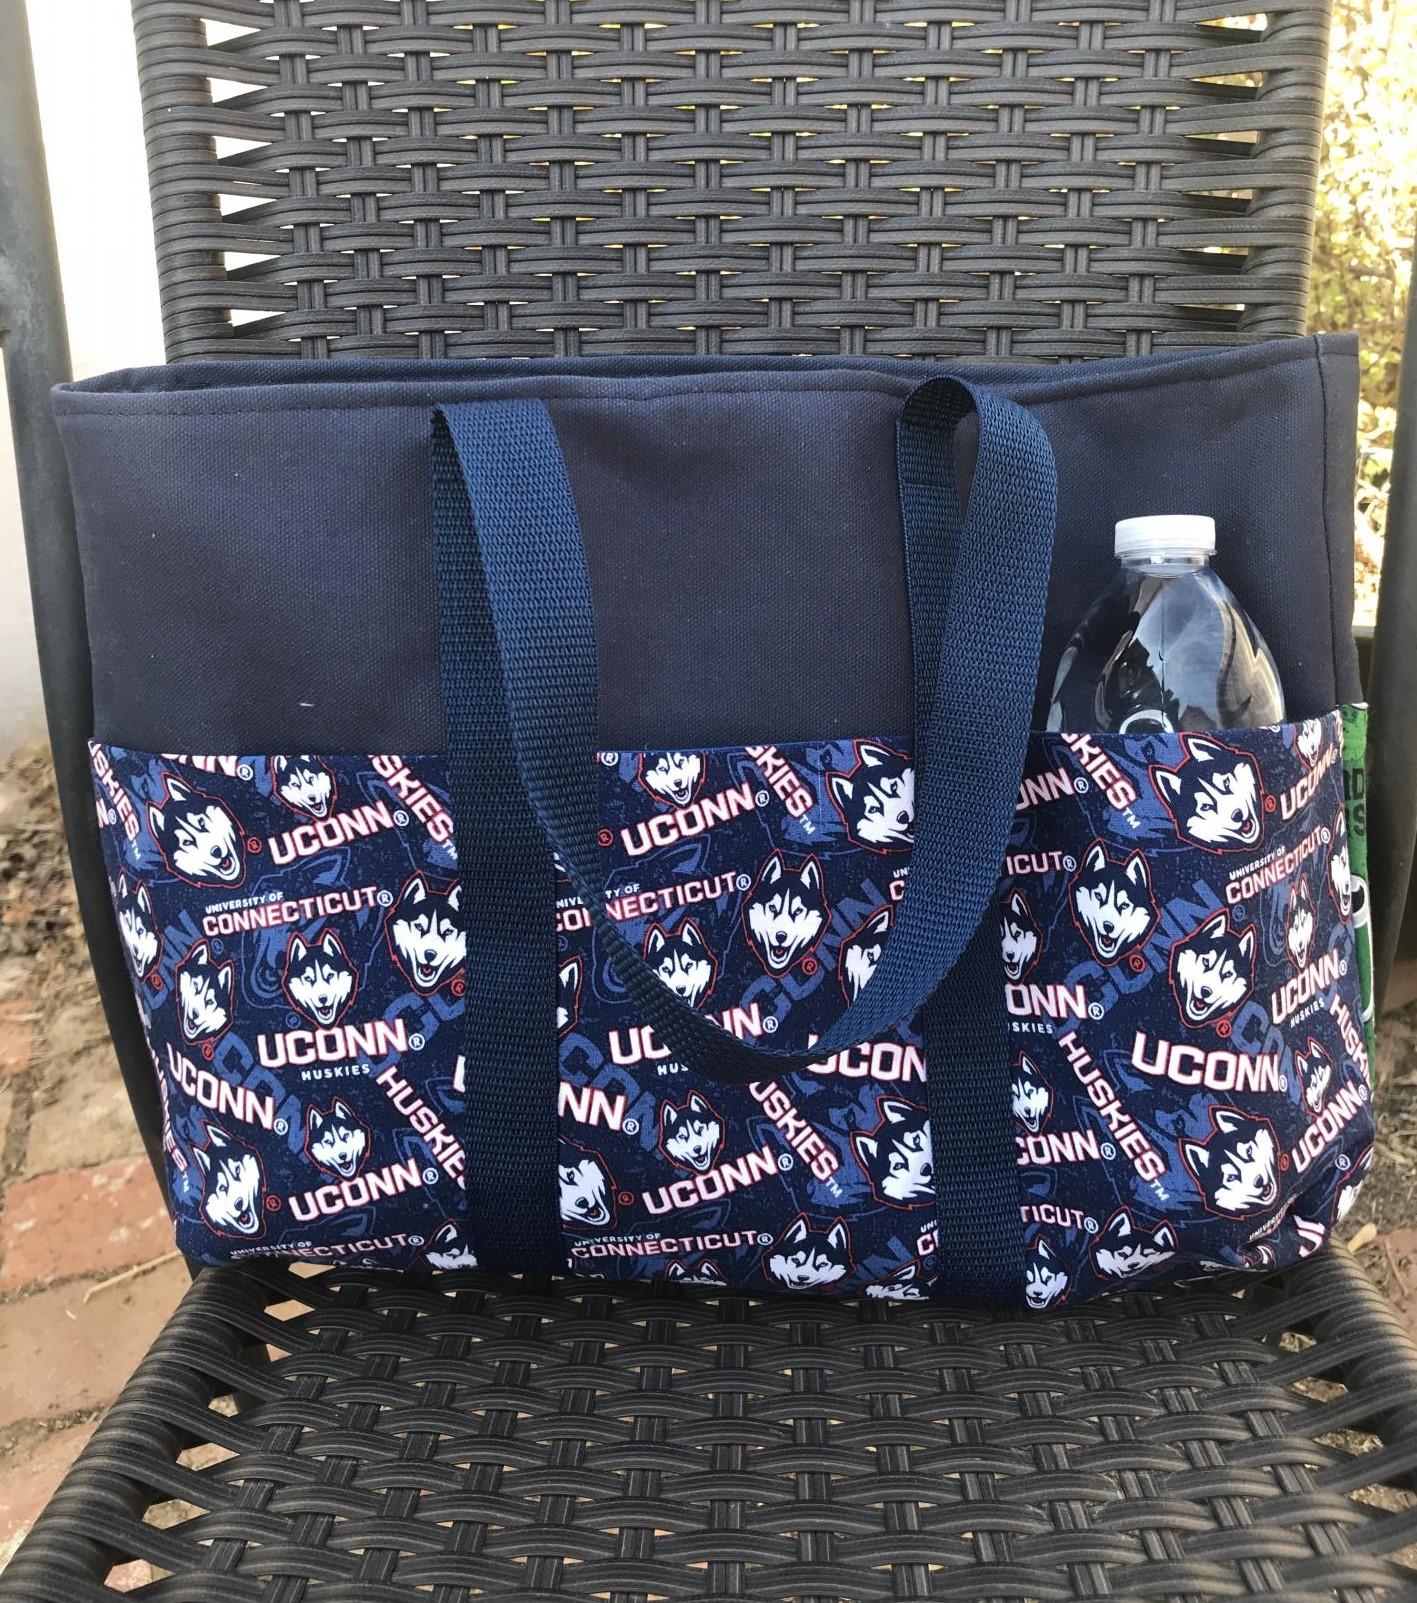 6 exterior pockets, Water bottle (not included) shows scale of bag